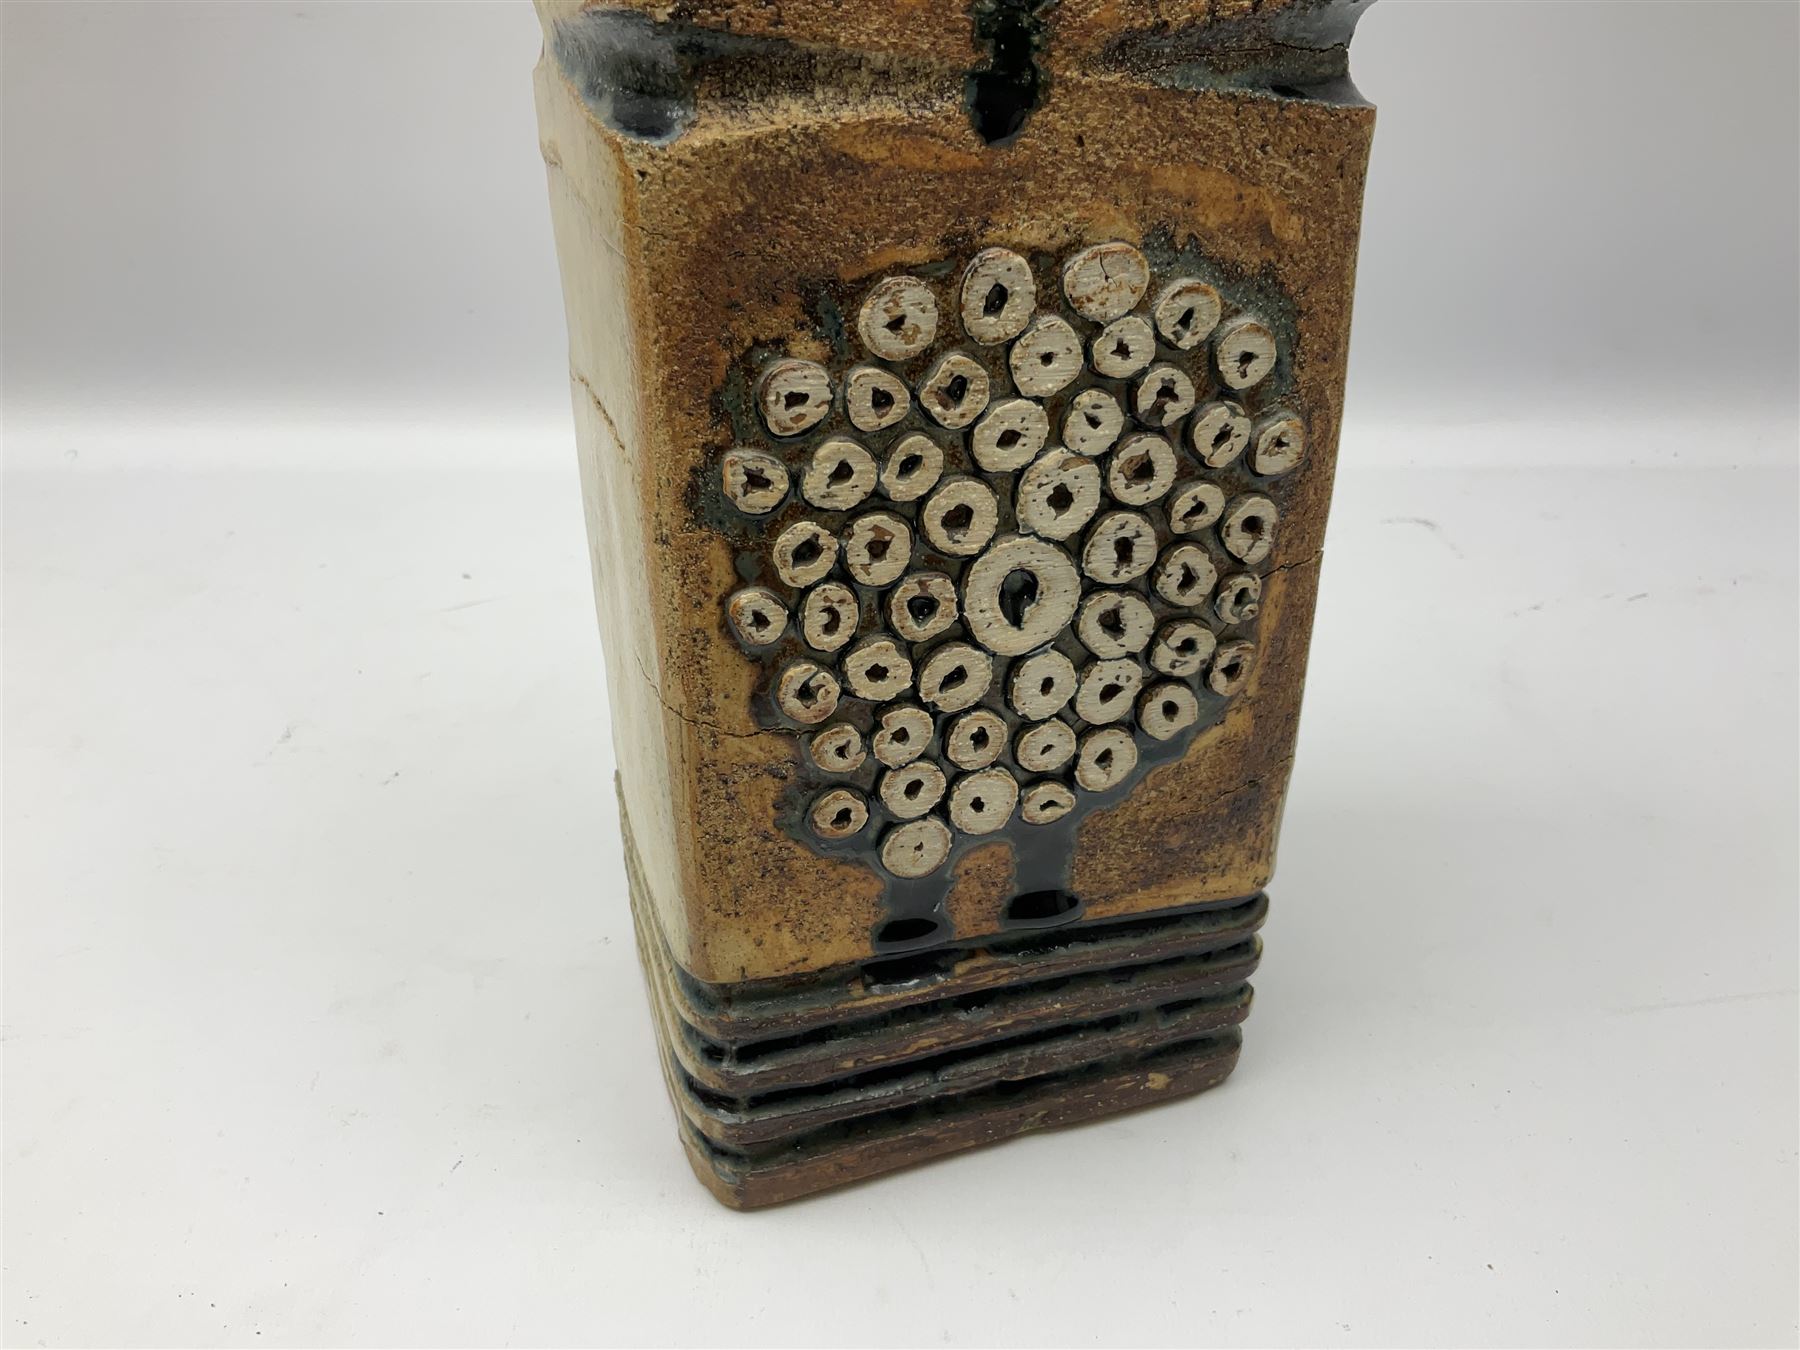 Studio pottery table lamp of slab built and moulded form with applied floral and abstract motifs - Image 6 of 9